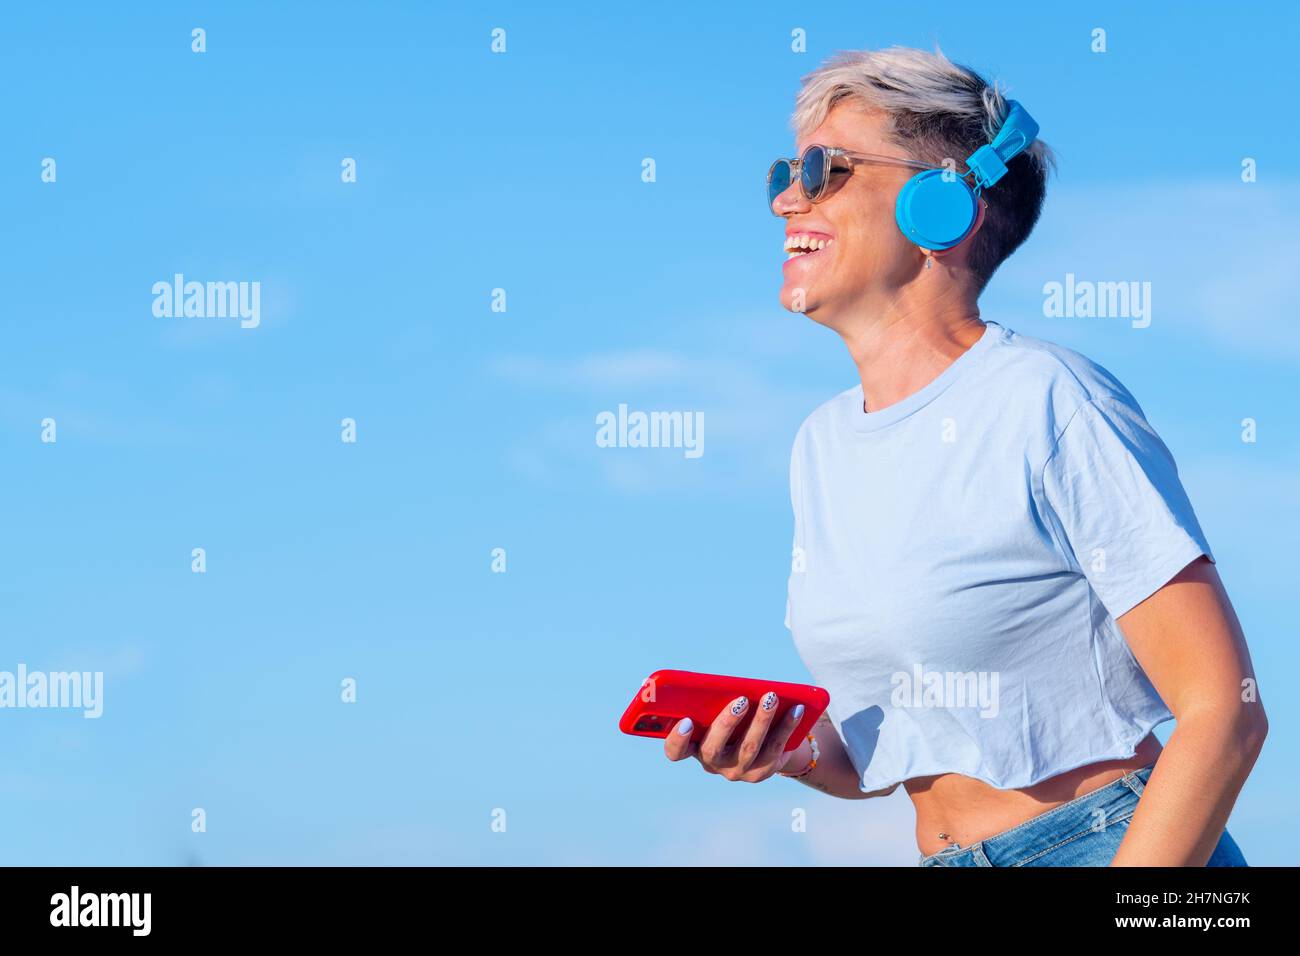 pretty young woman with short blond hair, sunglasses and short t-shirt showing her belly button has fun and smiles listening to music with wireless he Stock Photo